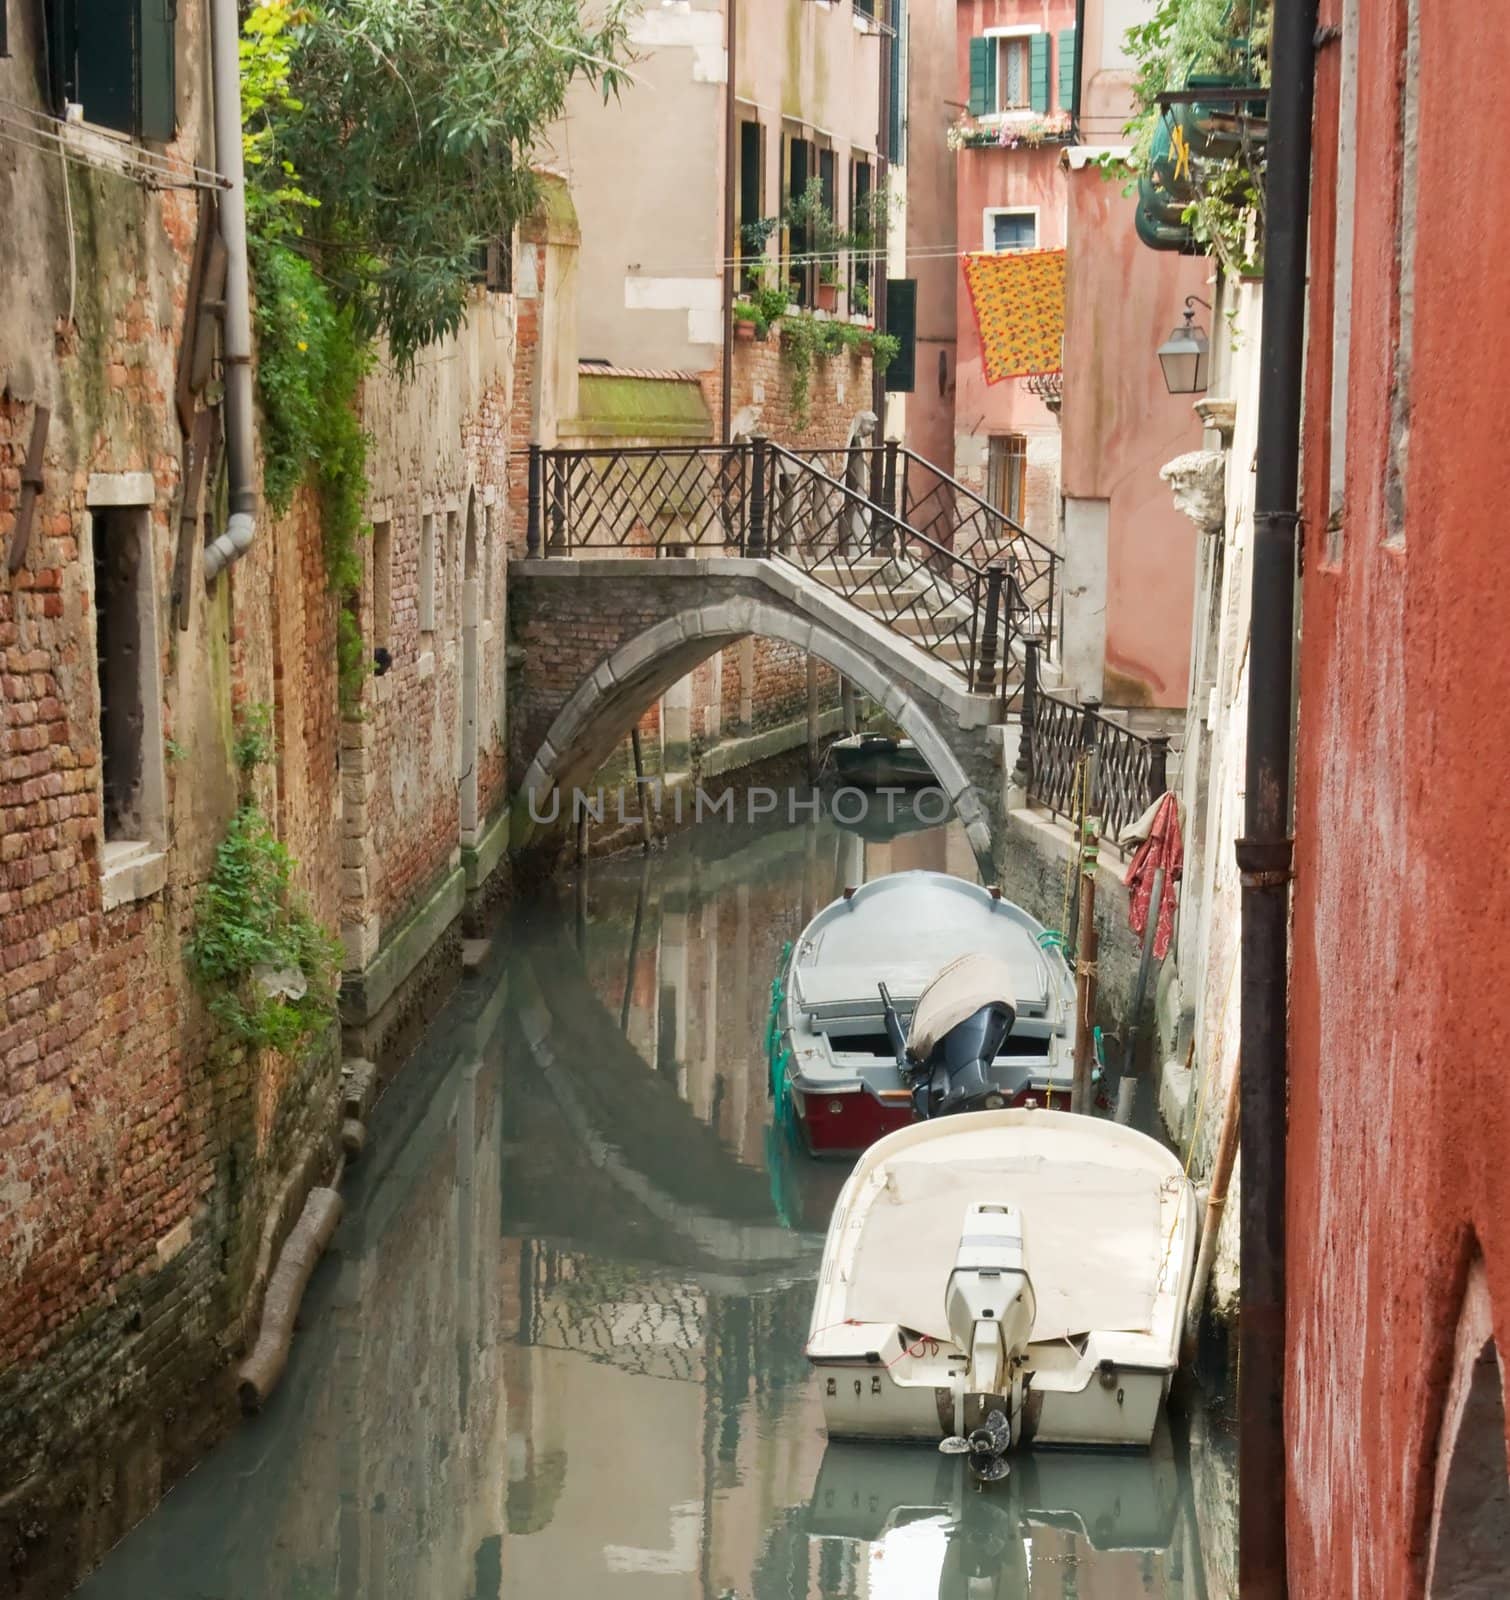 Canal, bridge, boats and reflections in Venice